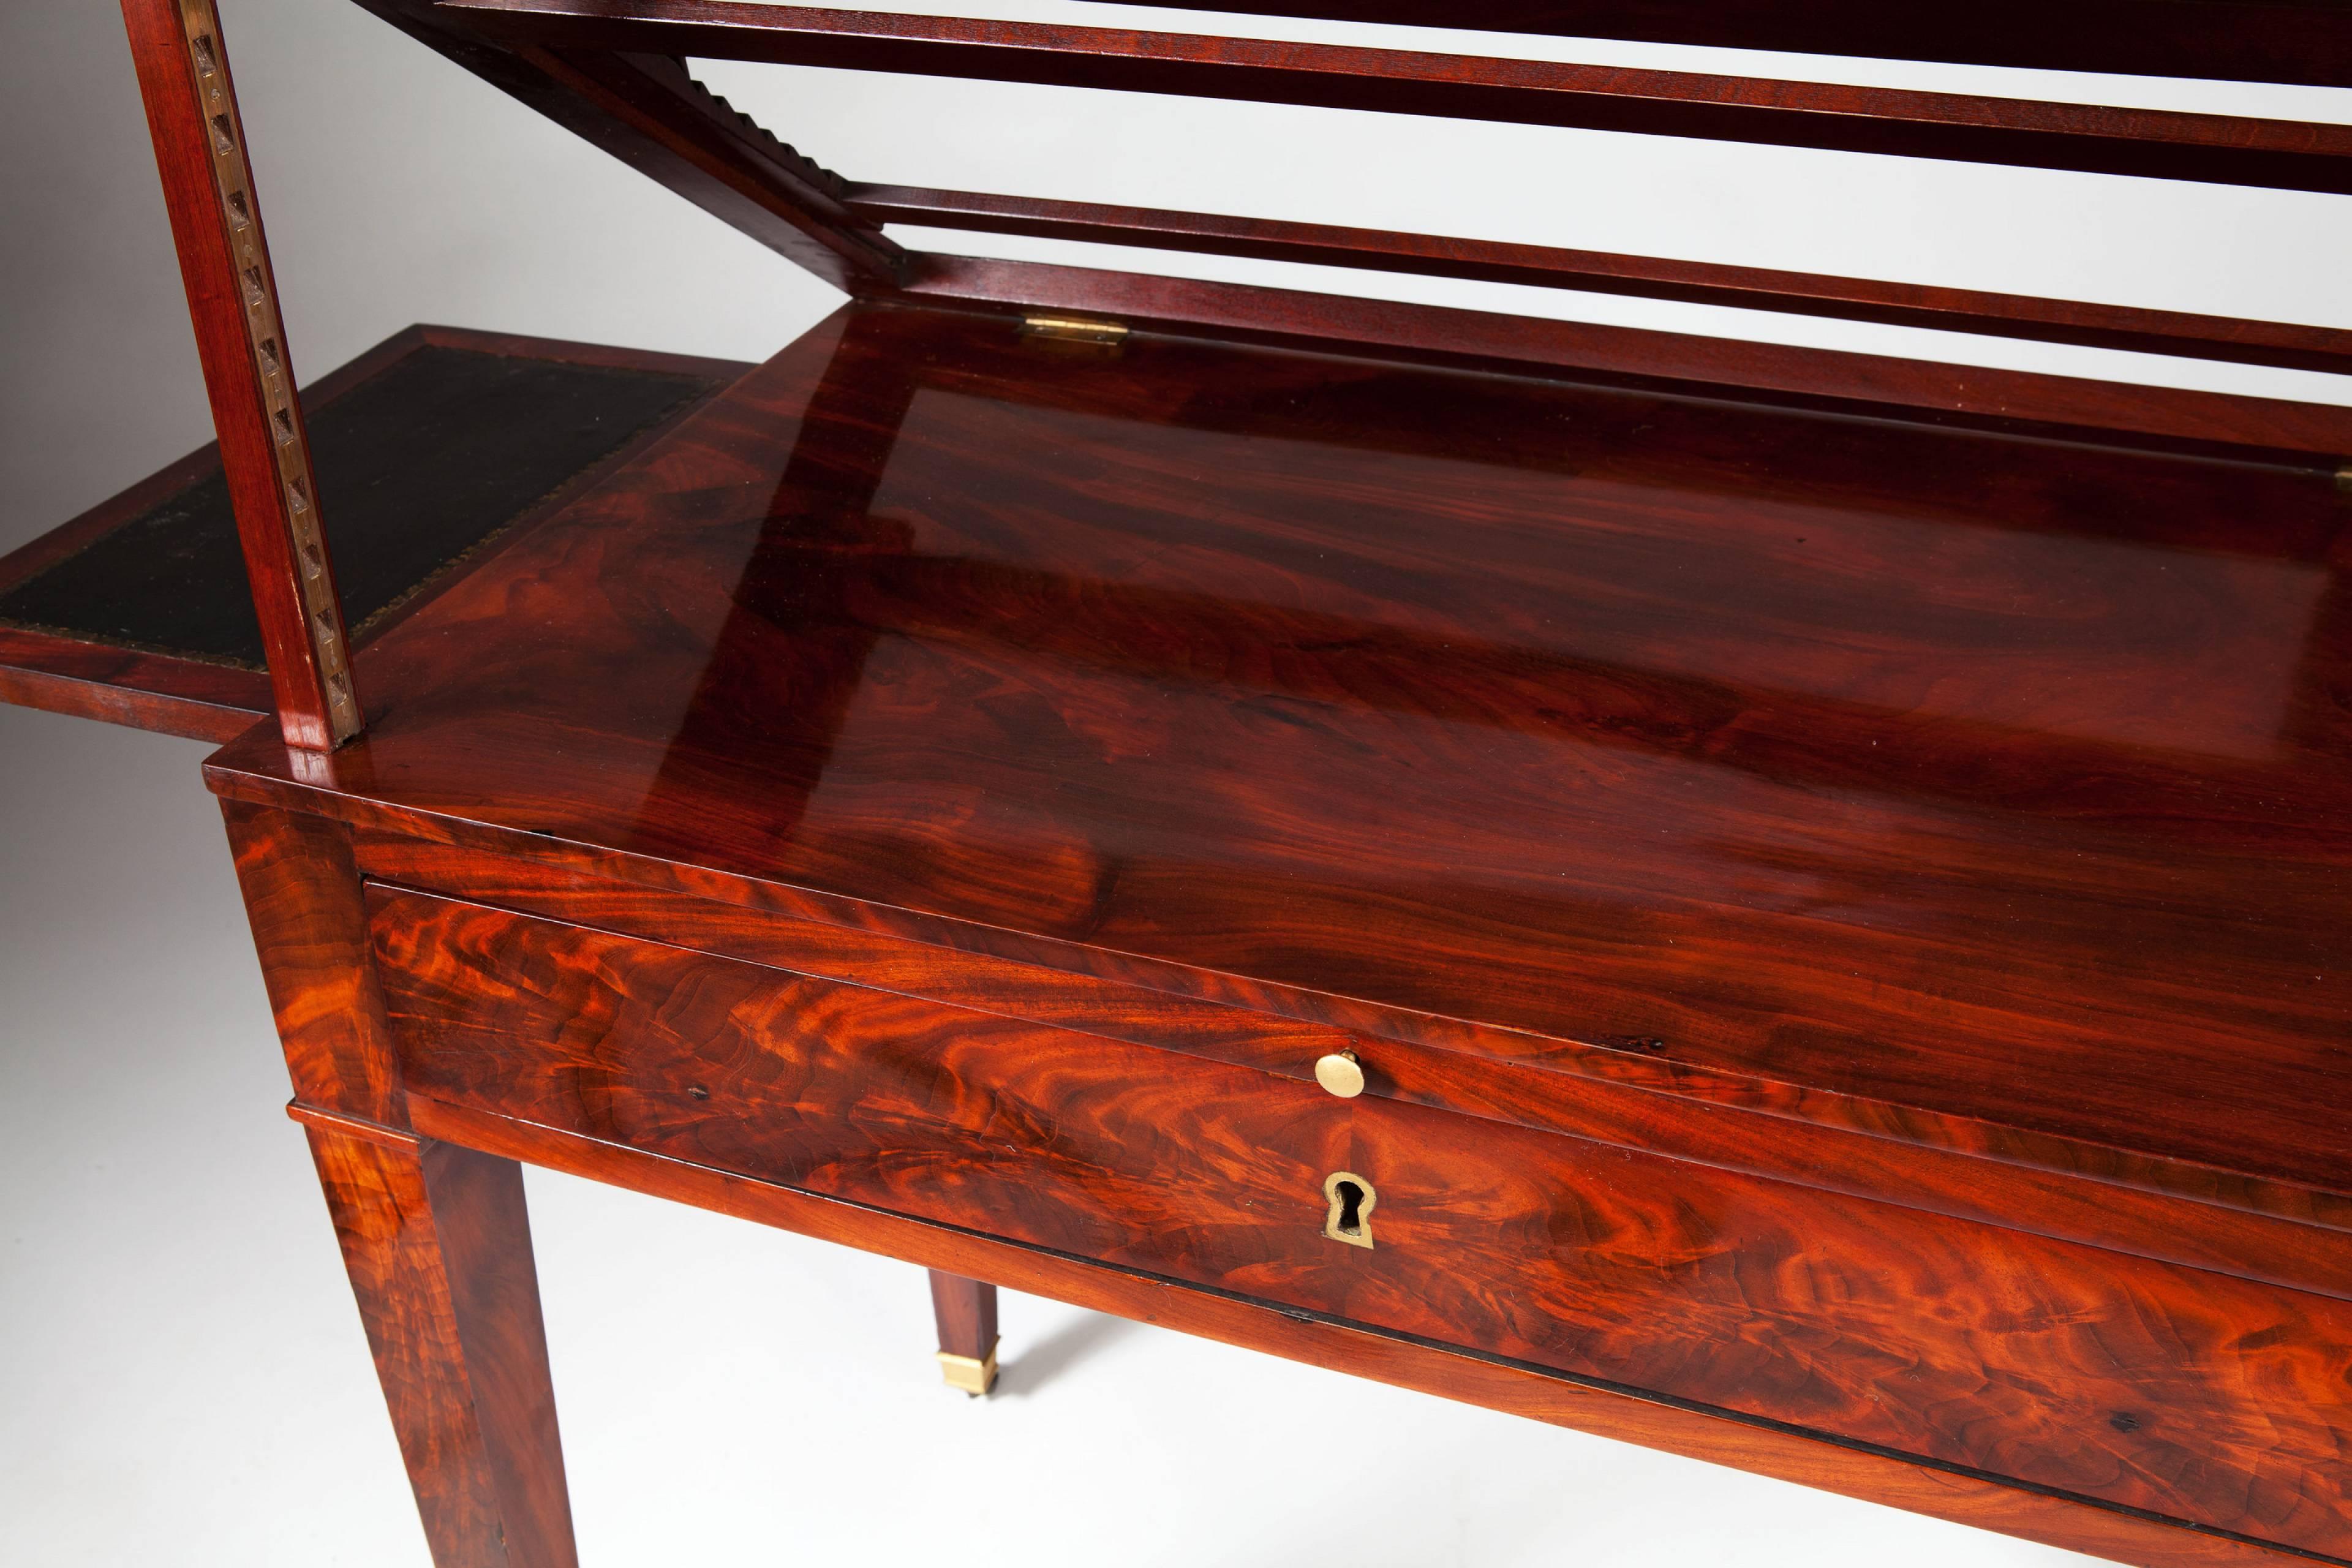 Directoire Flame Mahogany Architects Table a La Tronchin In Excellent Condition In London, by appointment only